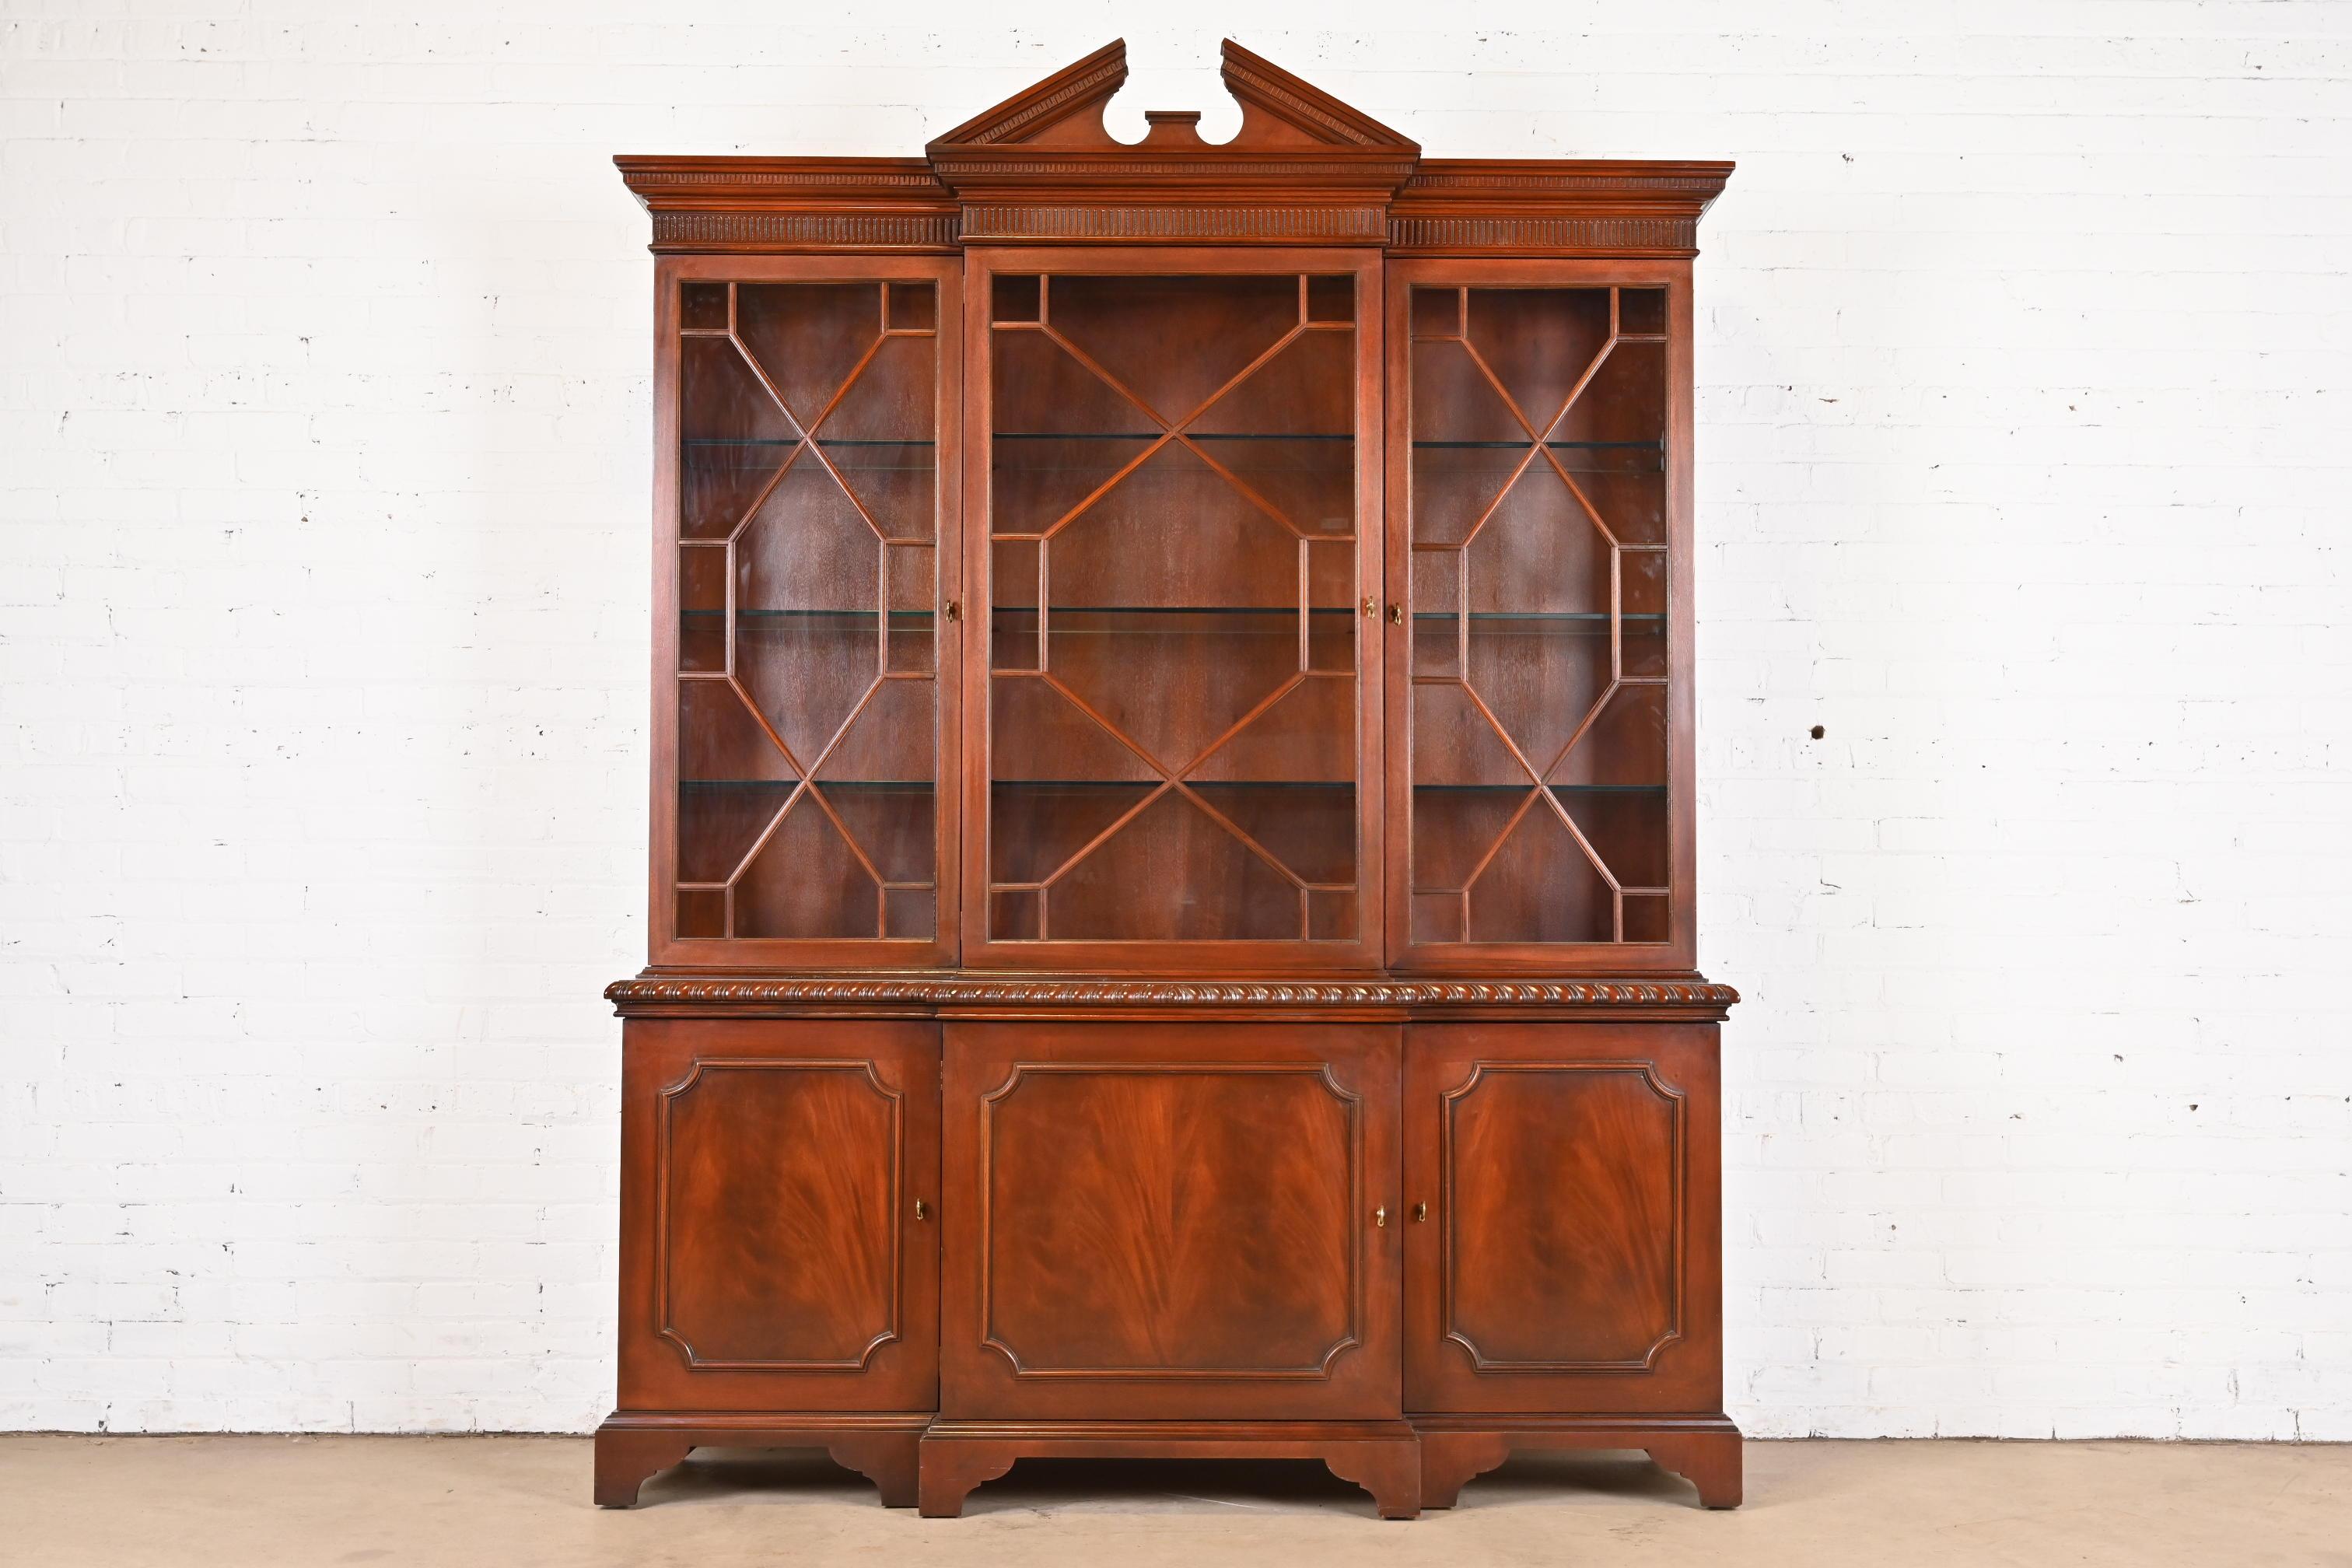 A gorgeous Georgian or Chippendale style lighted breakfront bookcase or dining cabinet

By Baker Furniture, 